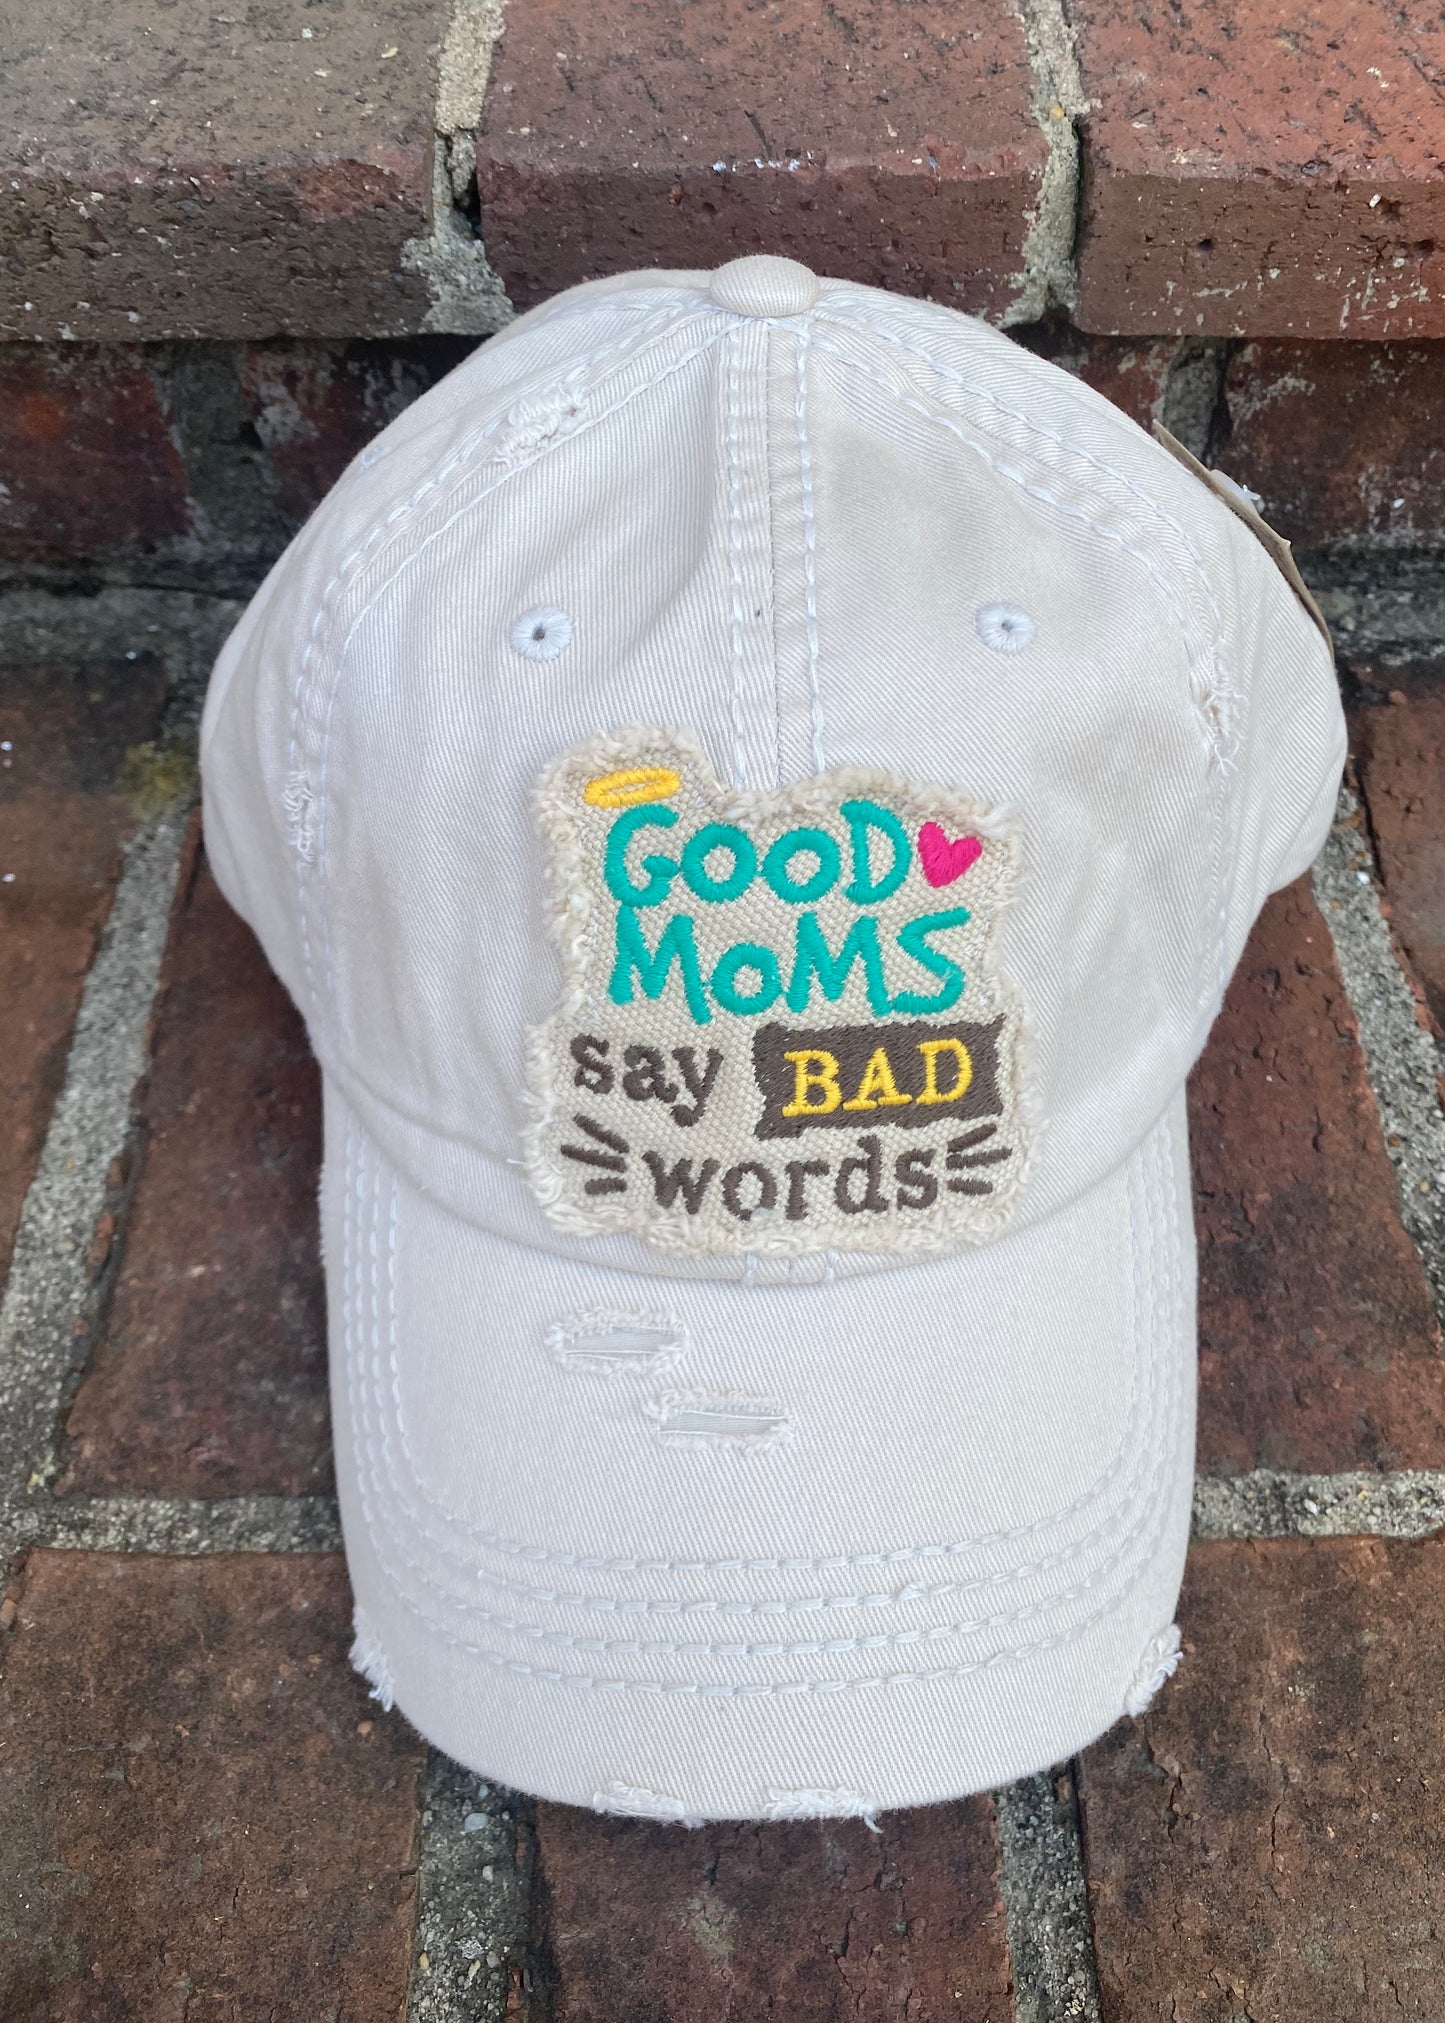 Good Moms Say Bad Words Distressed Cap - Jimberly's Boutique